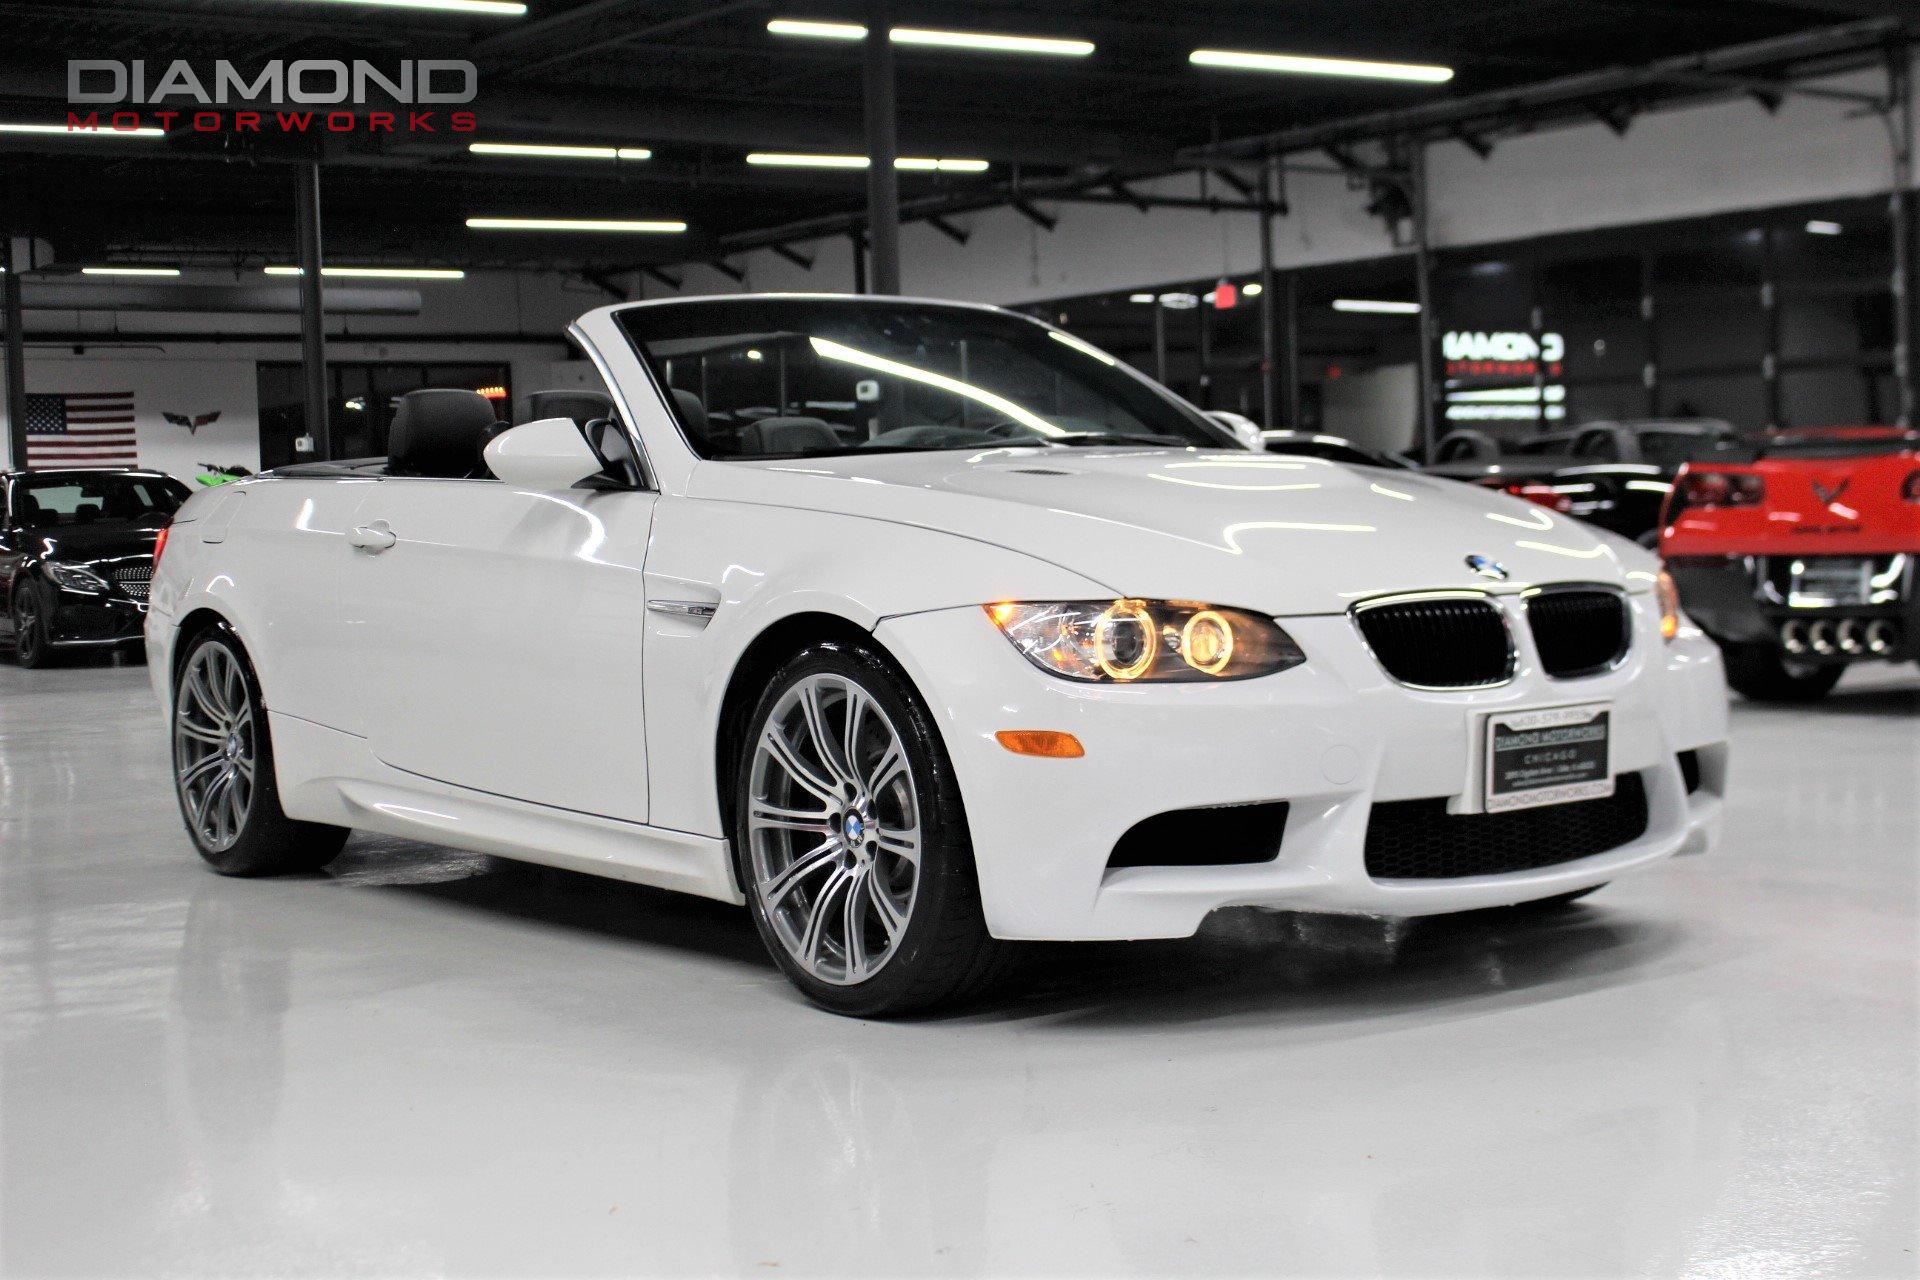 2011 BMW M3 Hardtop Convertible Stock # 399040 for sale near Lisle, IL